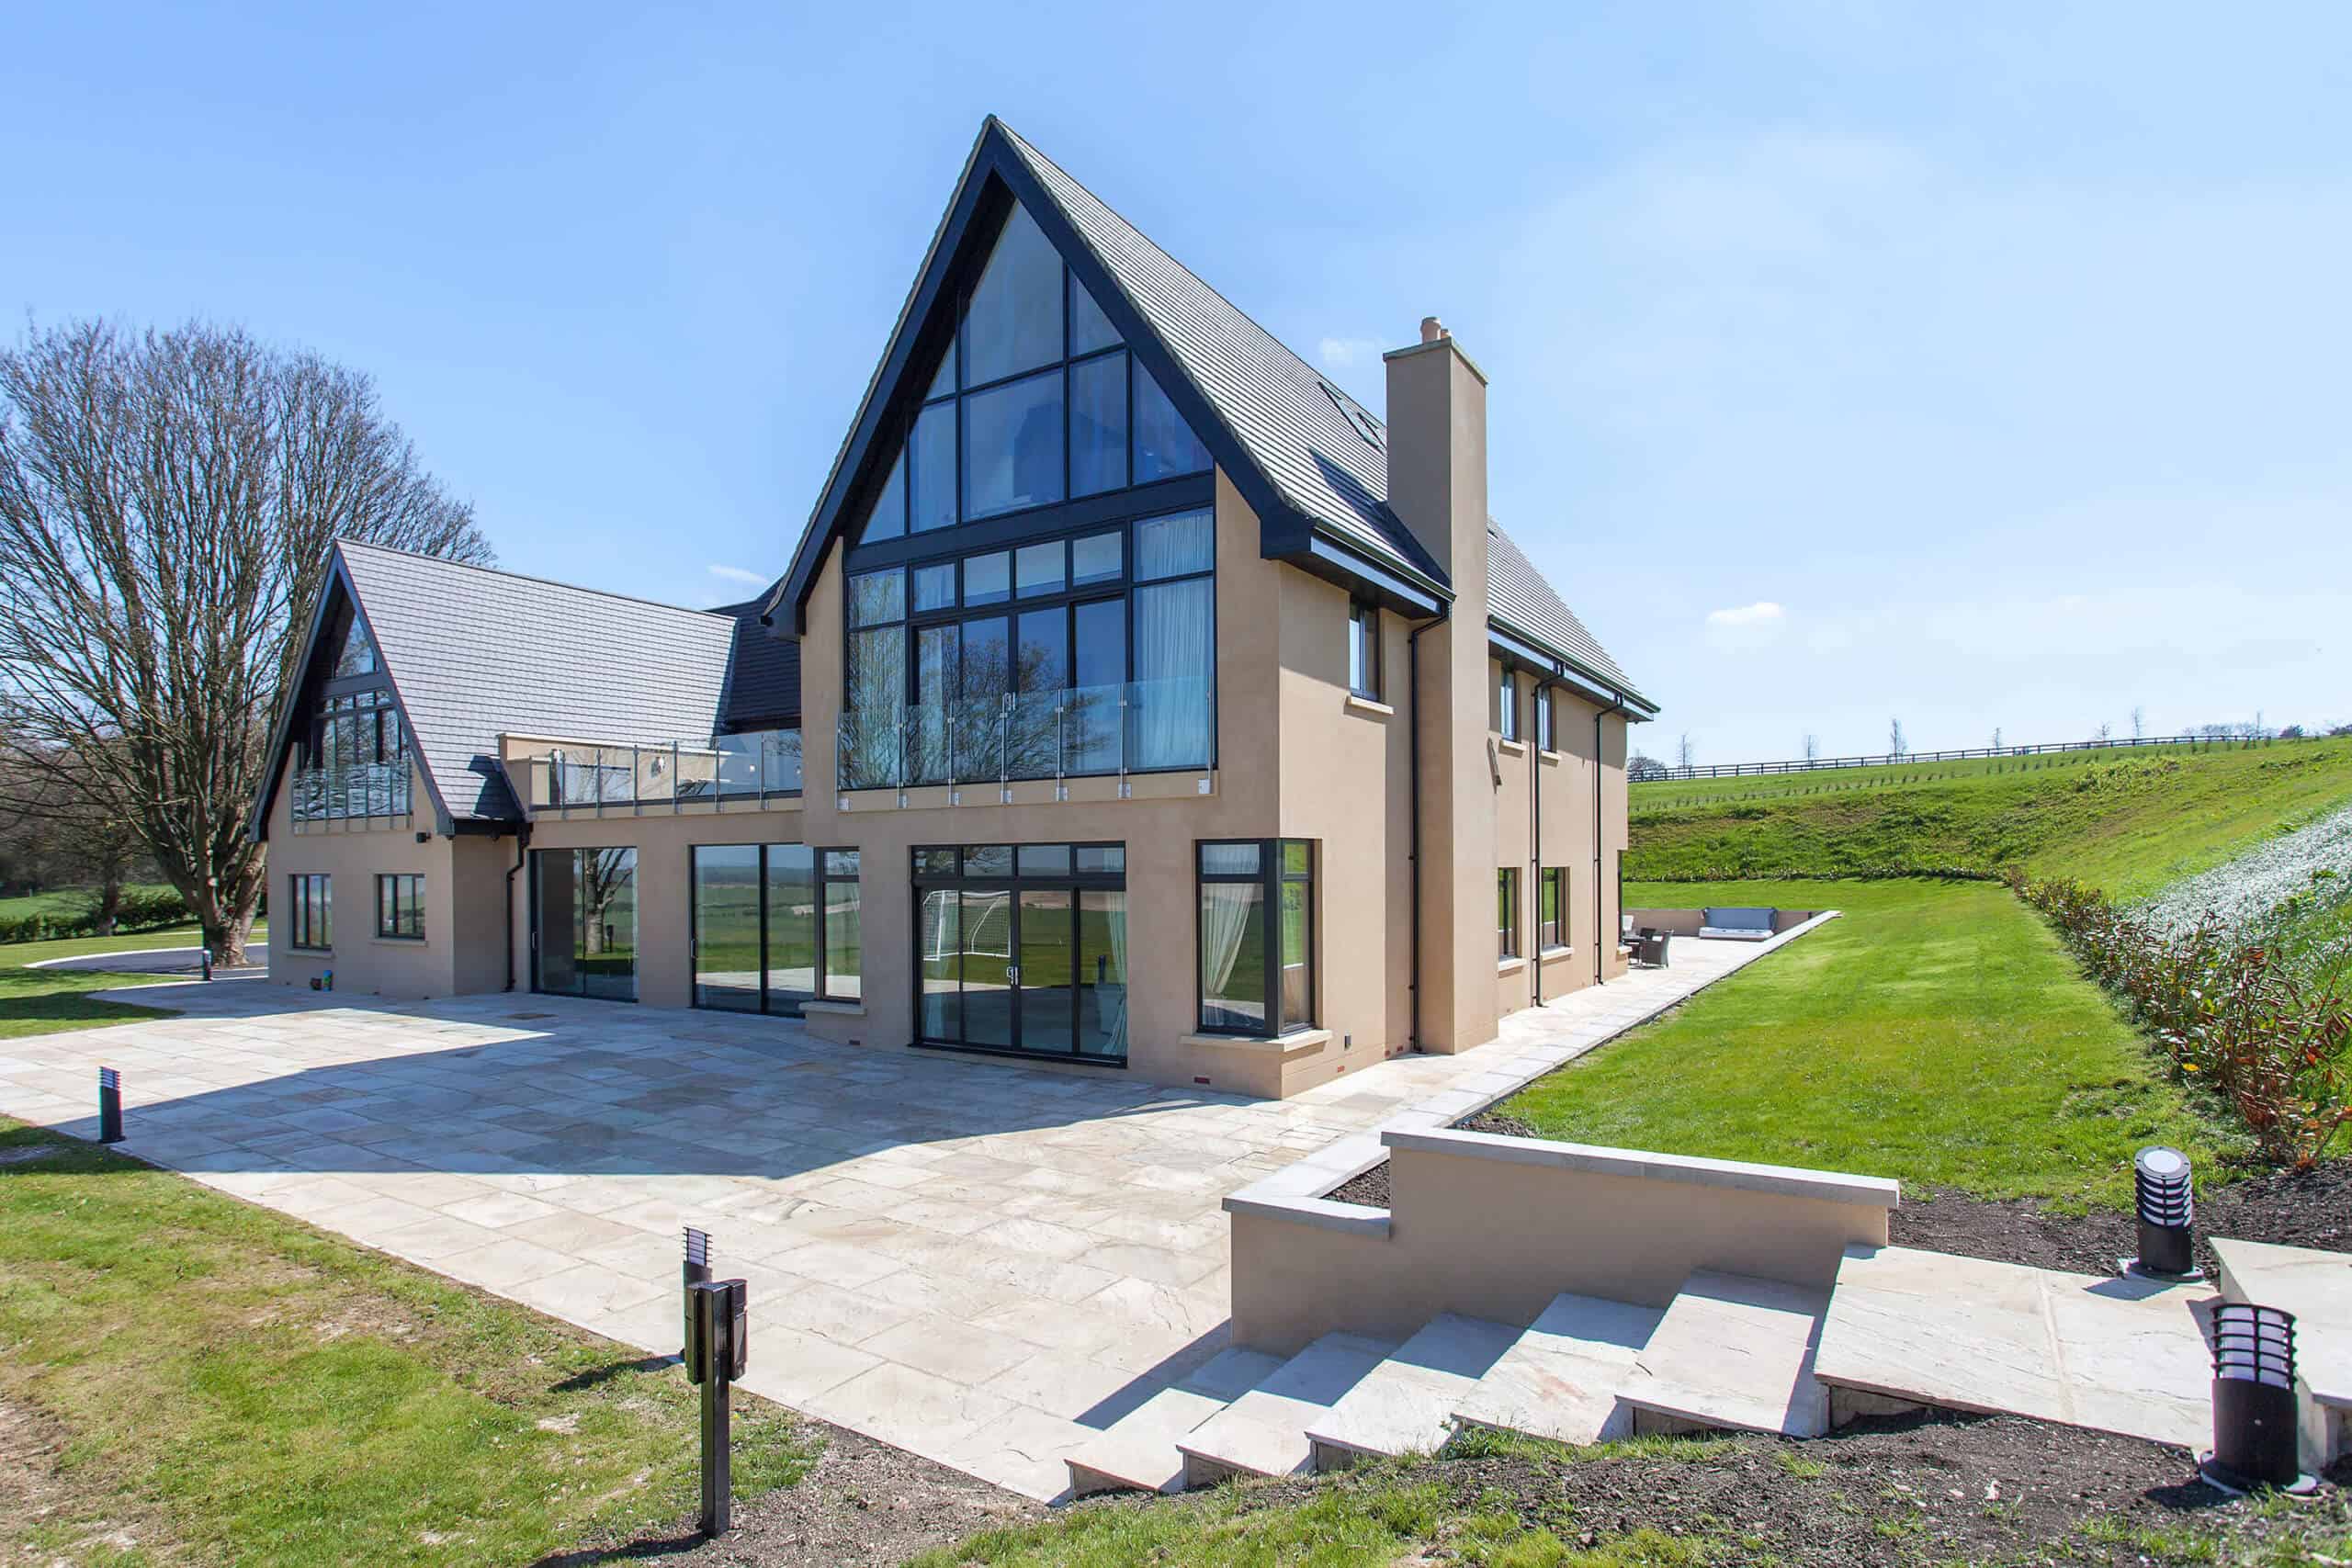 Architectural design features at the exterior of Lambourn Woodlands property